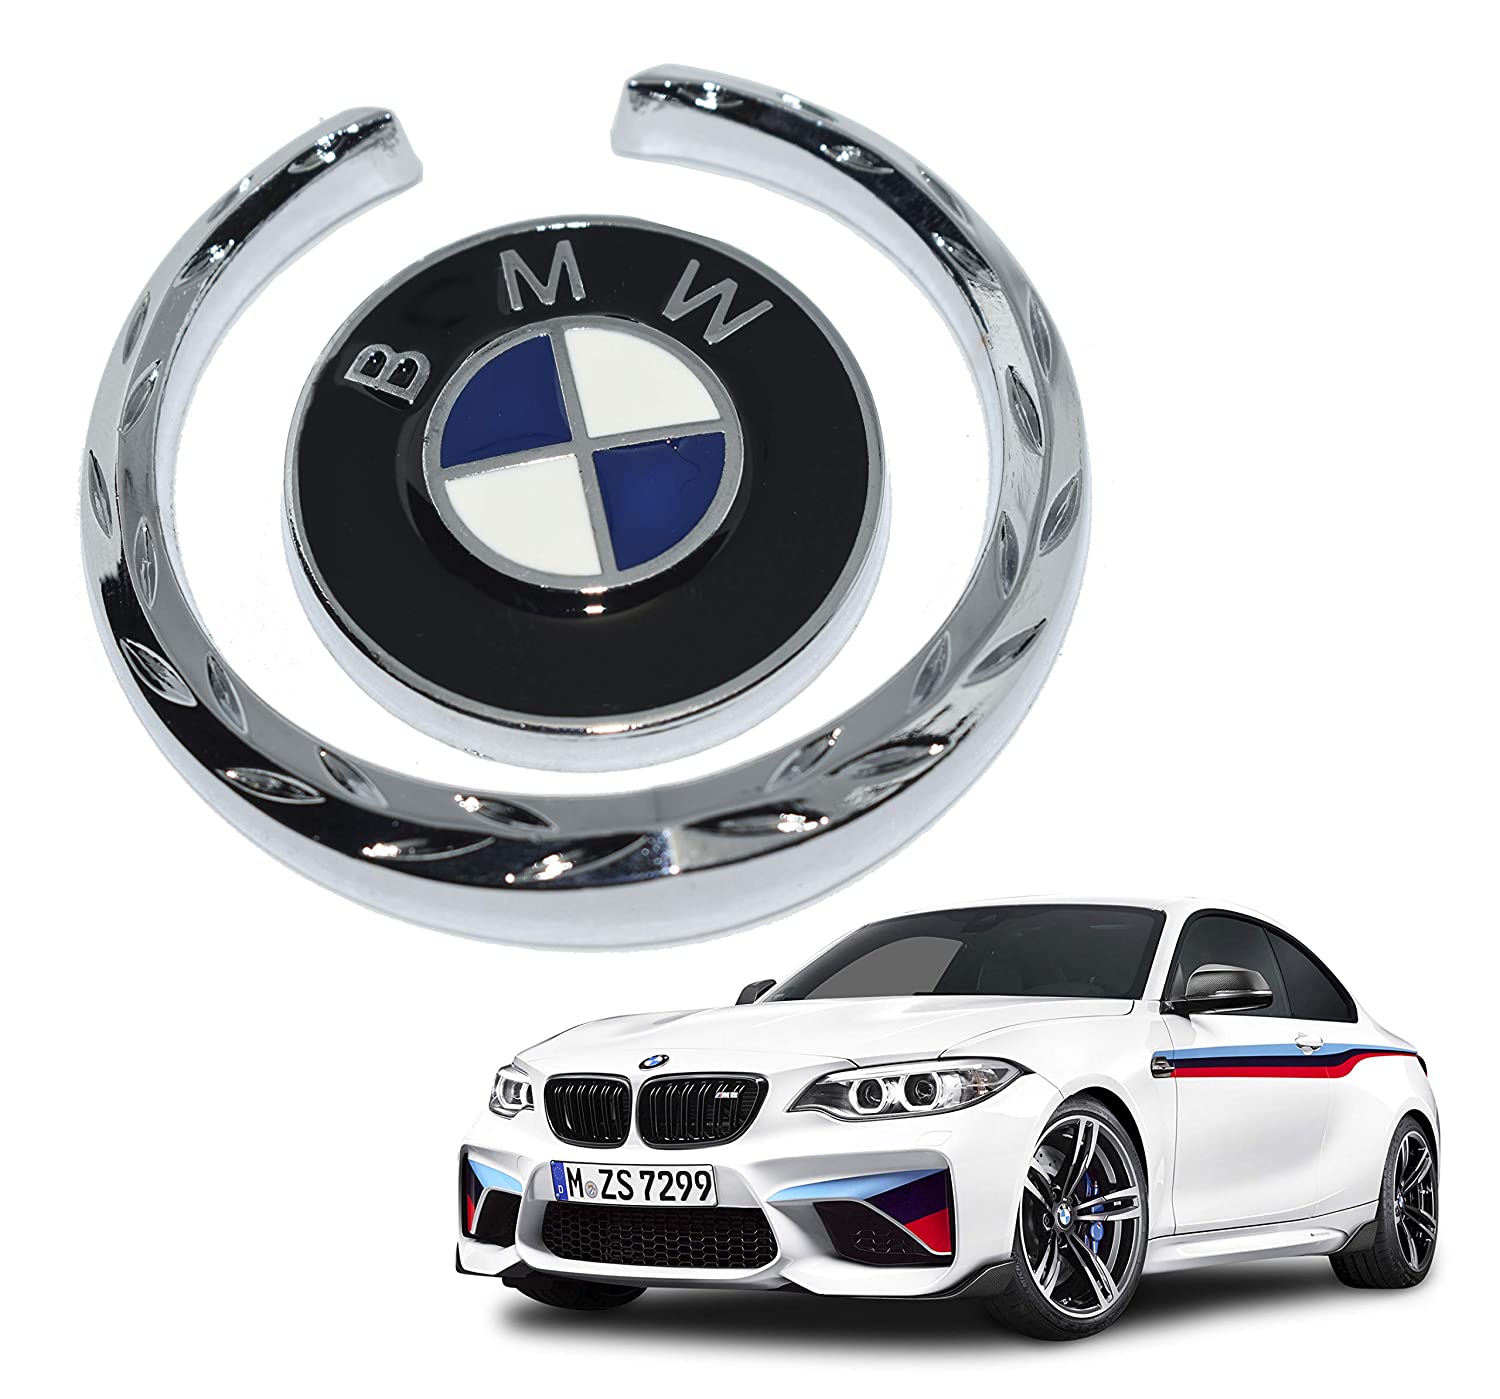 In 10 Minutes, You Will Know The Truth About BMW Car Insurance